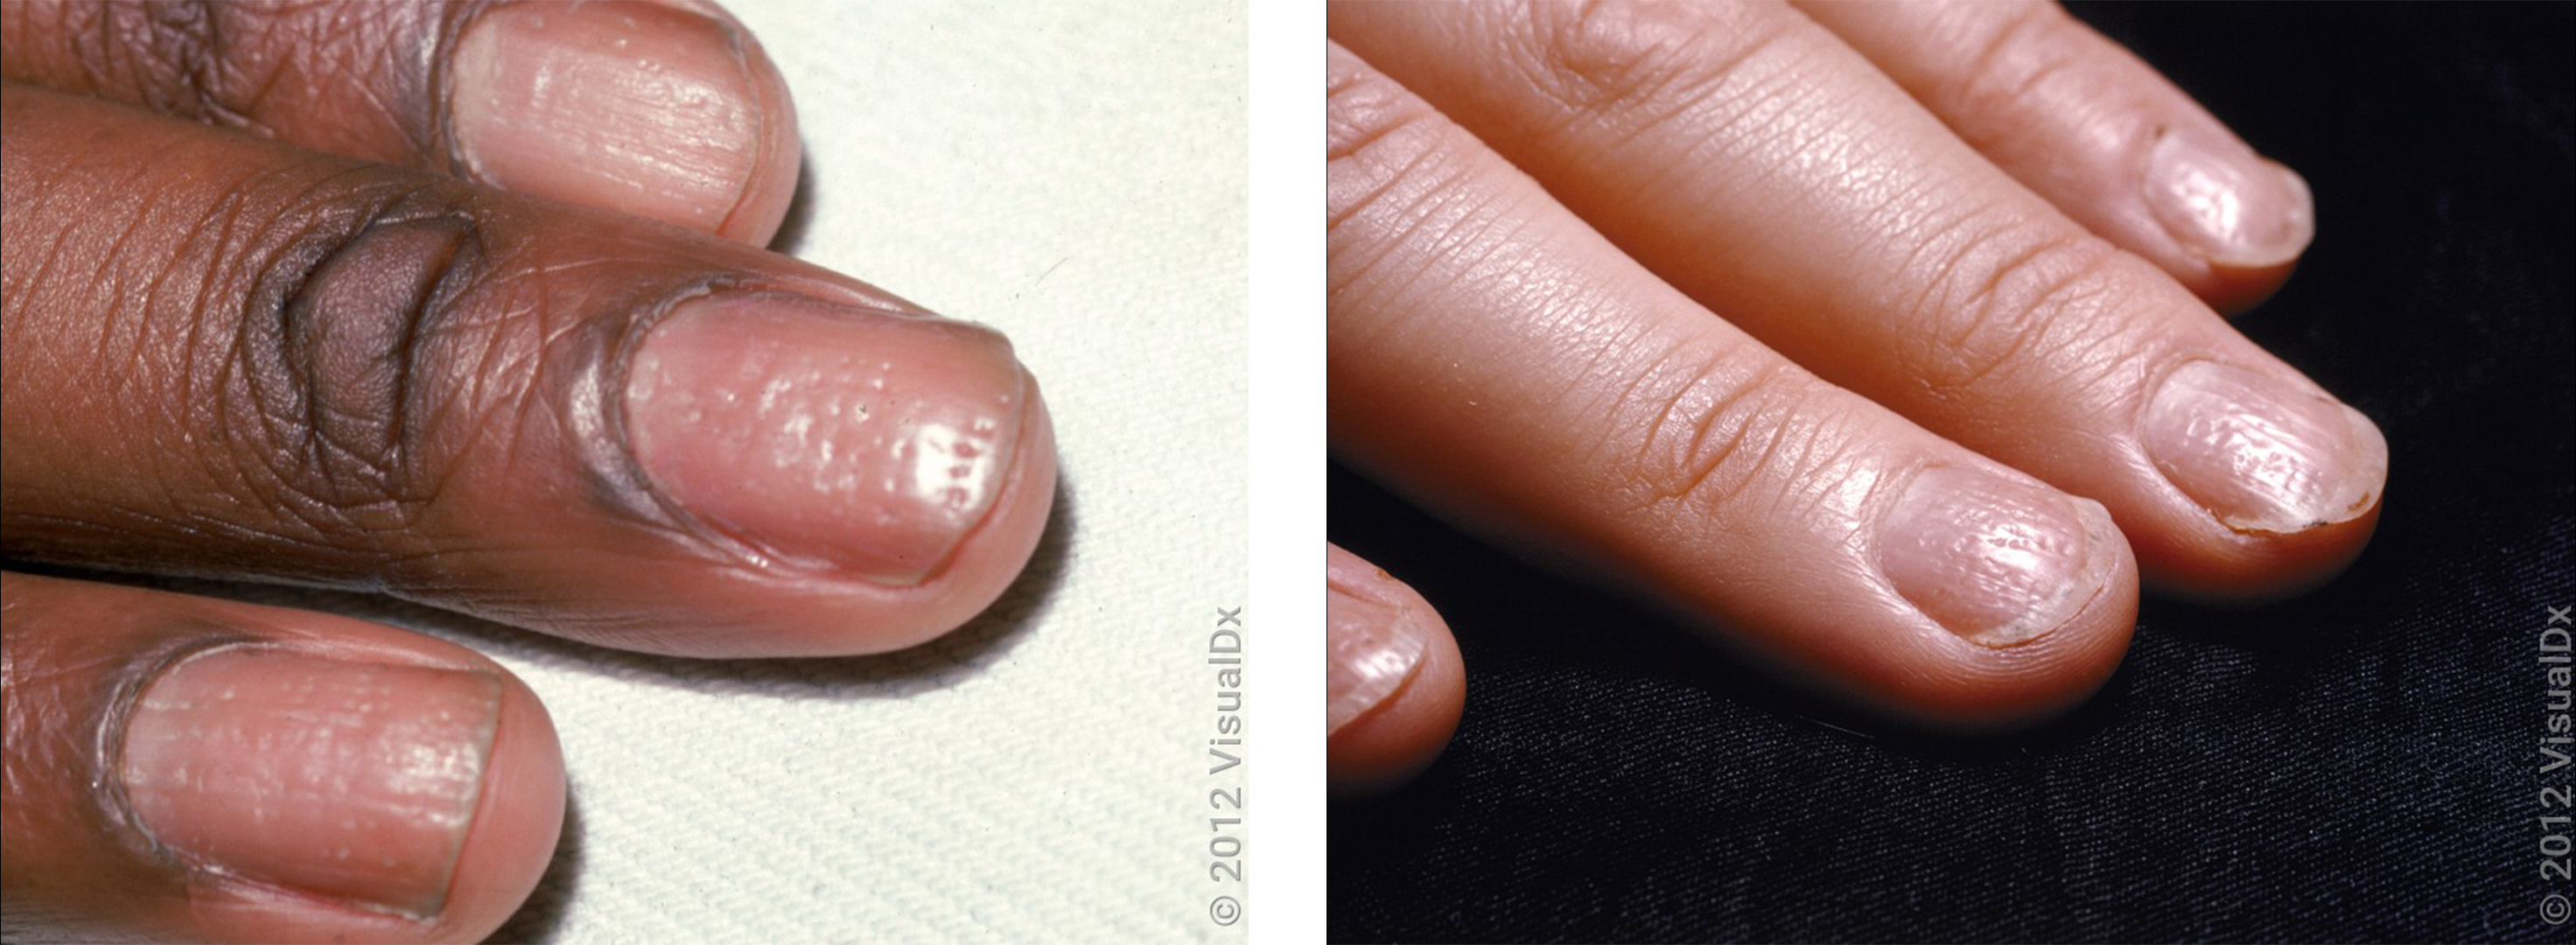 Nails (Human Anatomy): Picture, Functions, Diseases, and Treatments